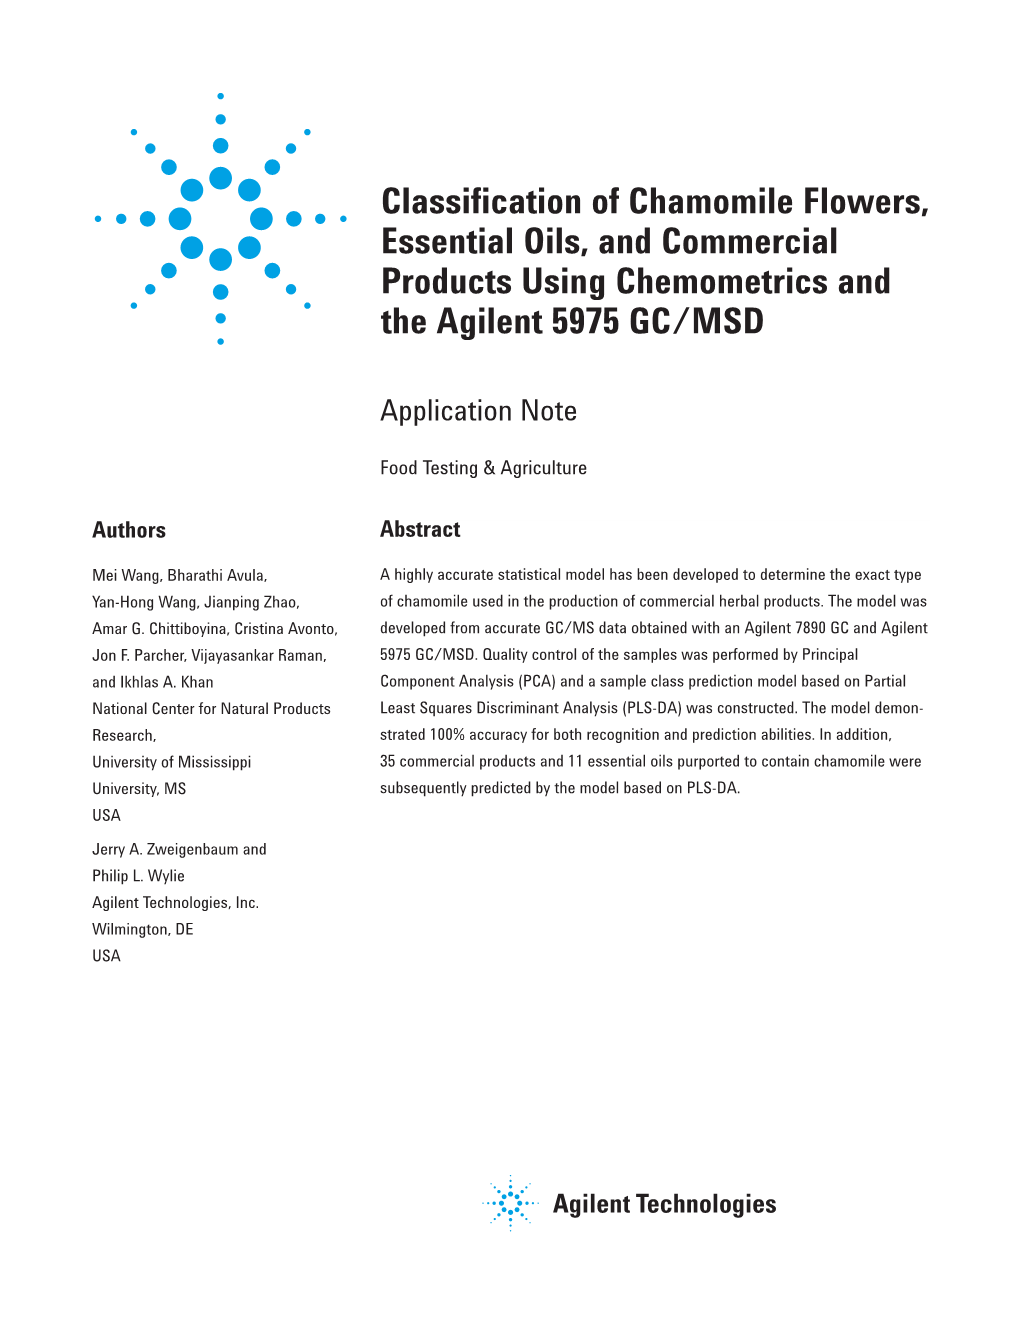 Classification of Chamomile Flowers, Essential Oils, and Commercial